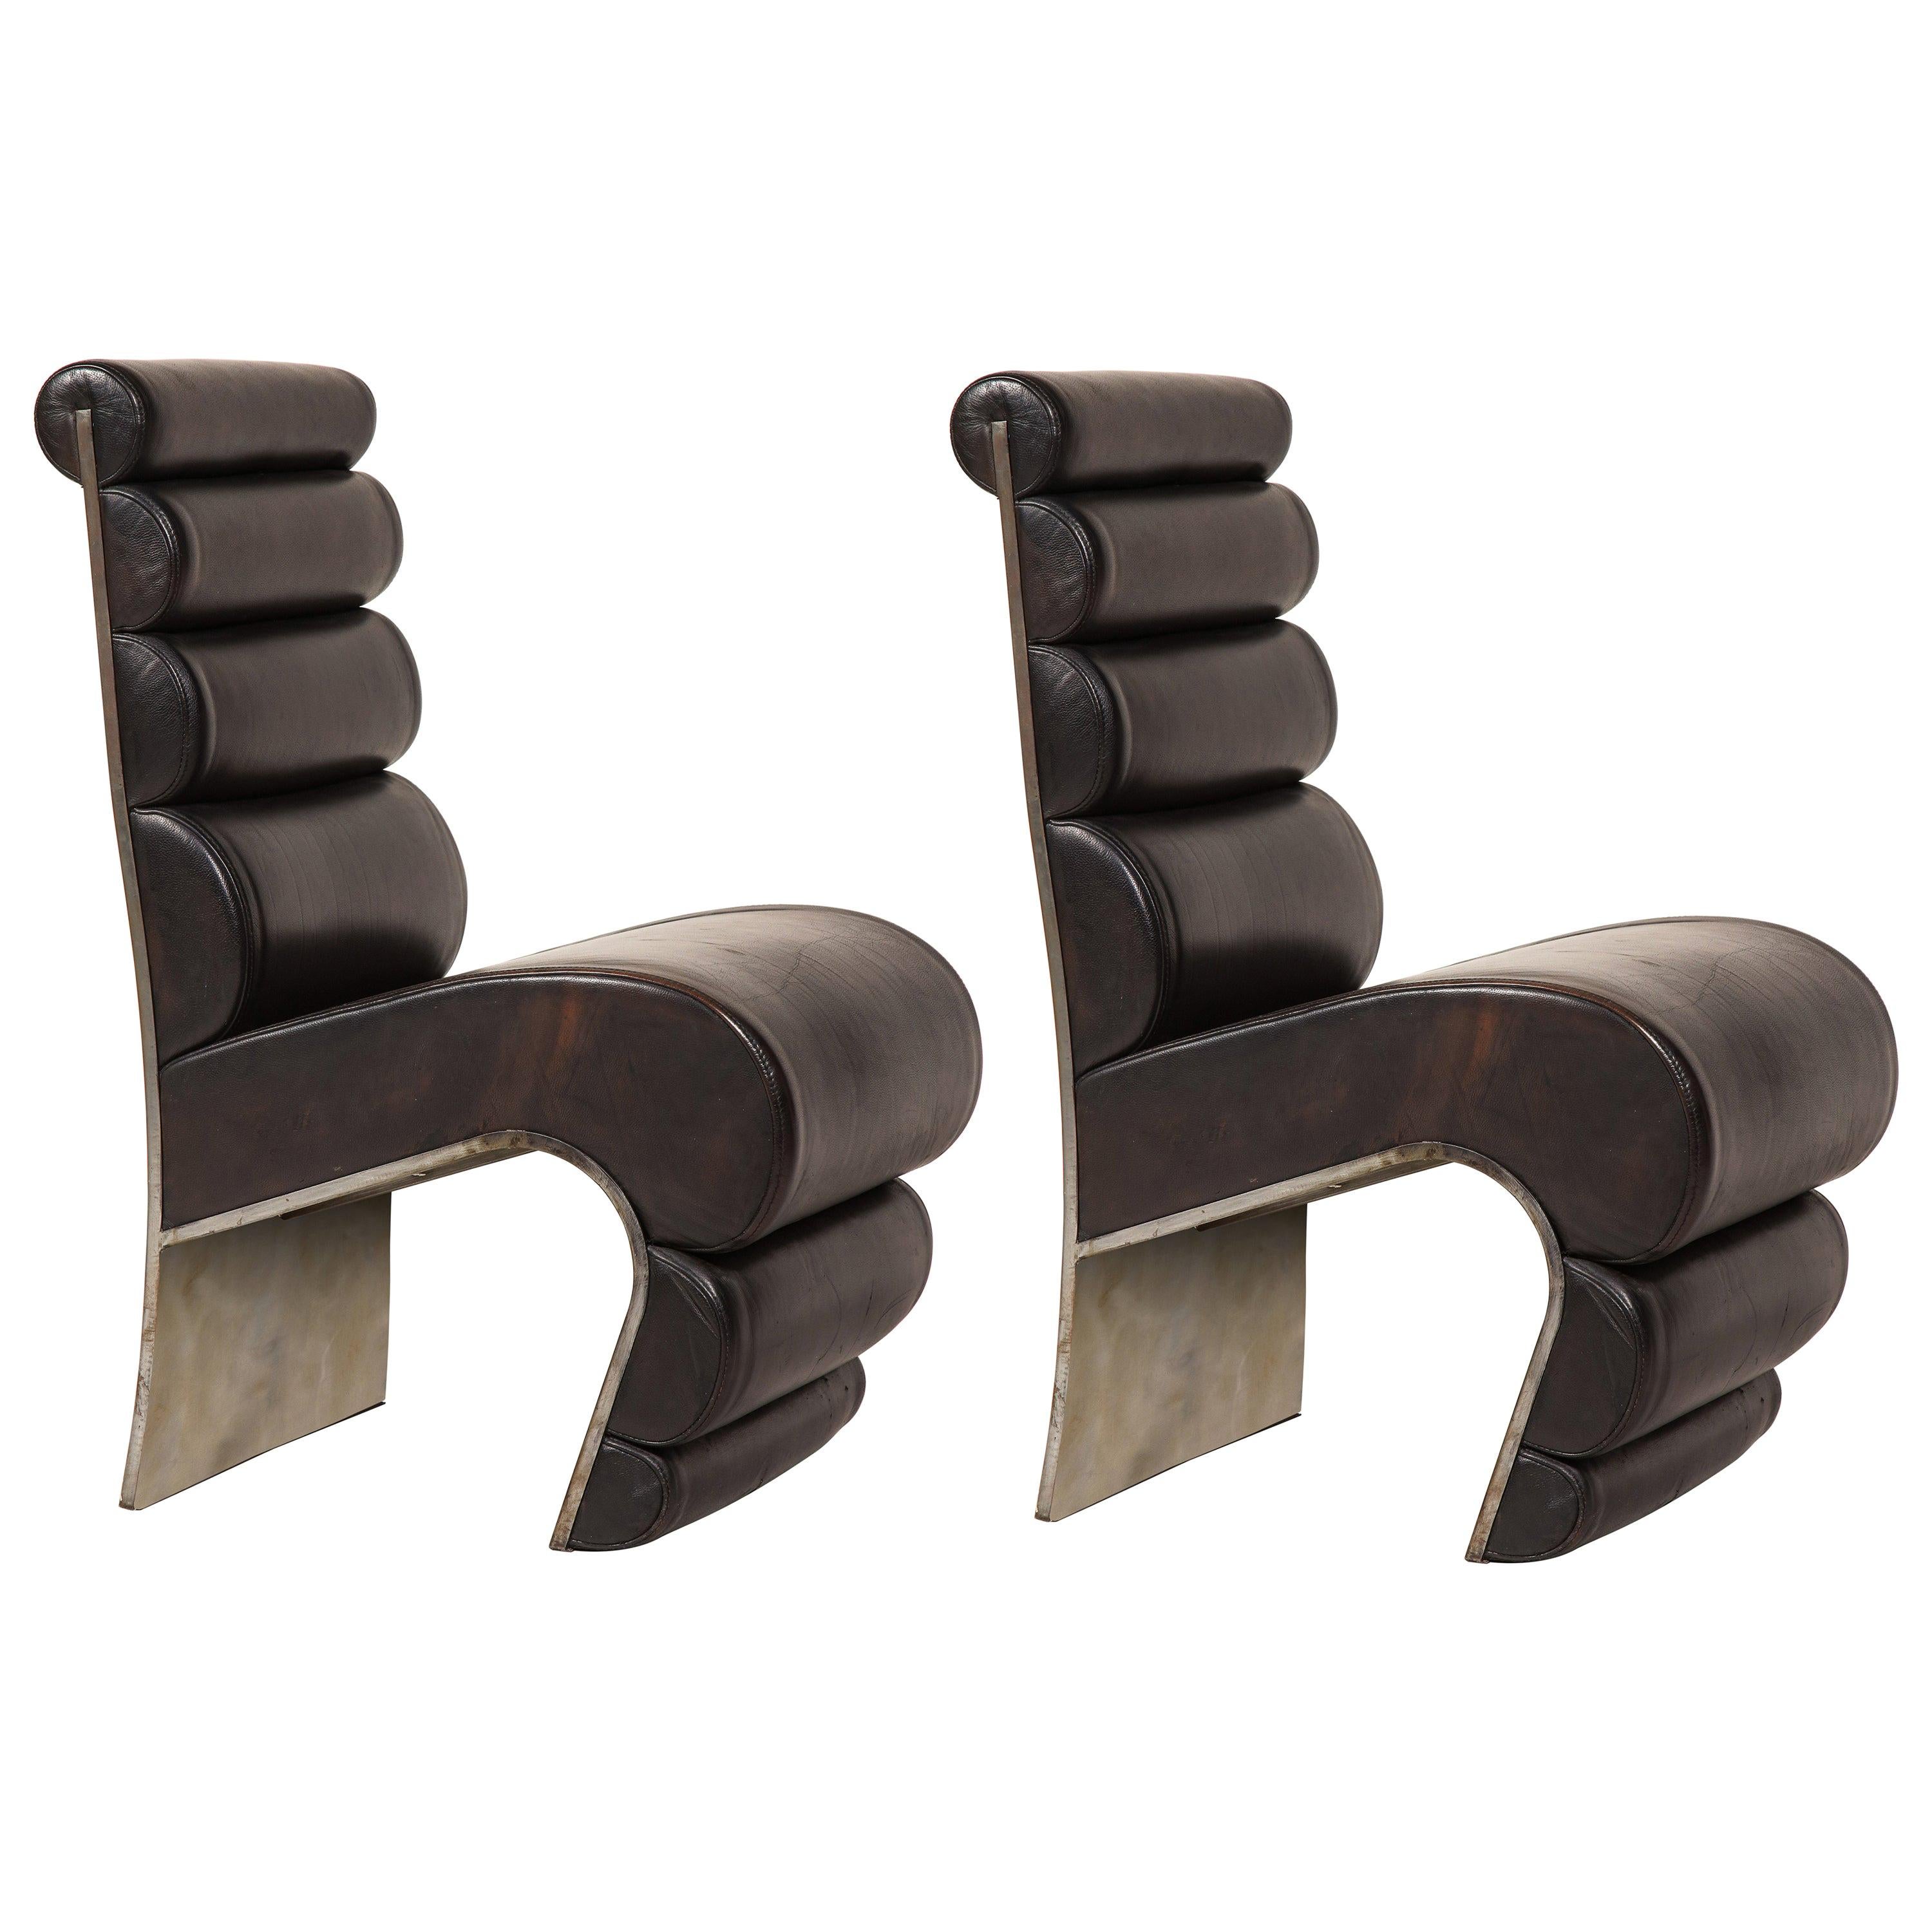 Sculptural steel brown leather French pair chairs, 1980s, France

These are very rare leather and steel chairs form France. From the Maria Pergay, Michel Boyer Era. The leather is in very good condition. These truly are unique. Sold as a pair.
 